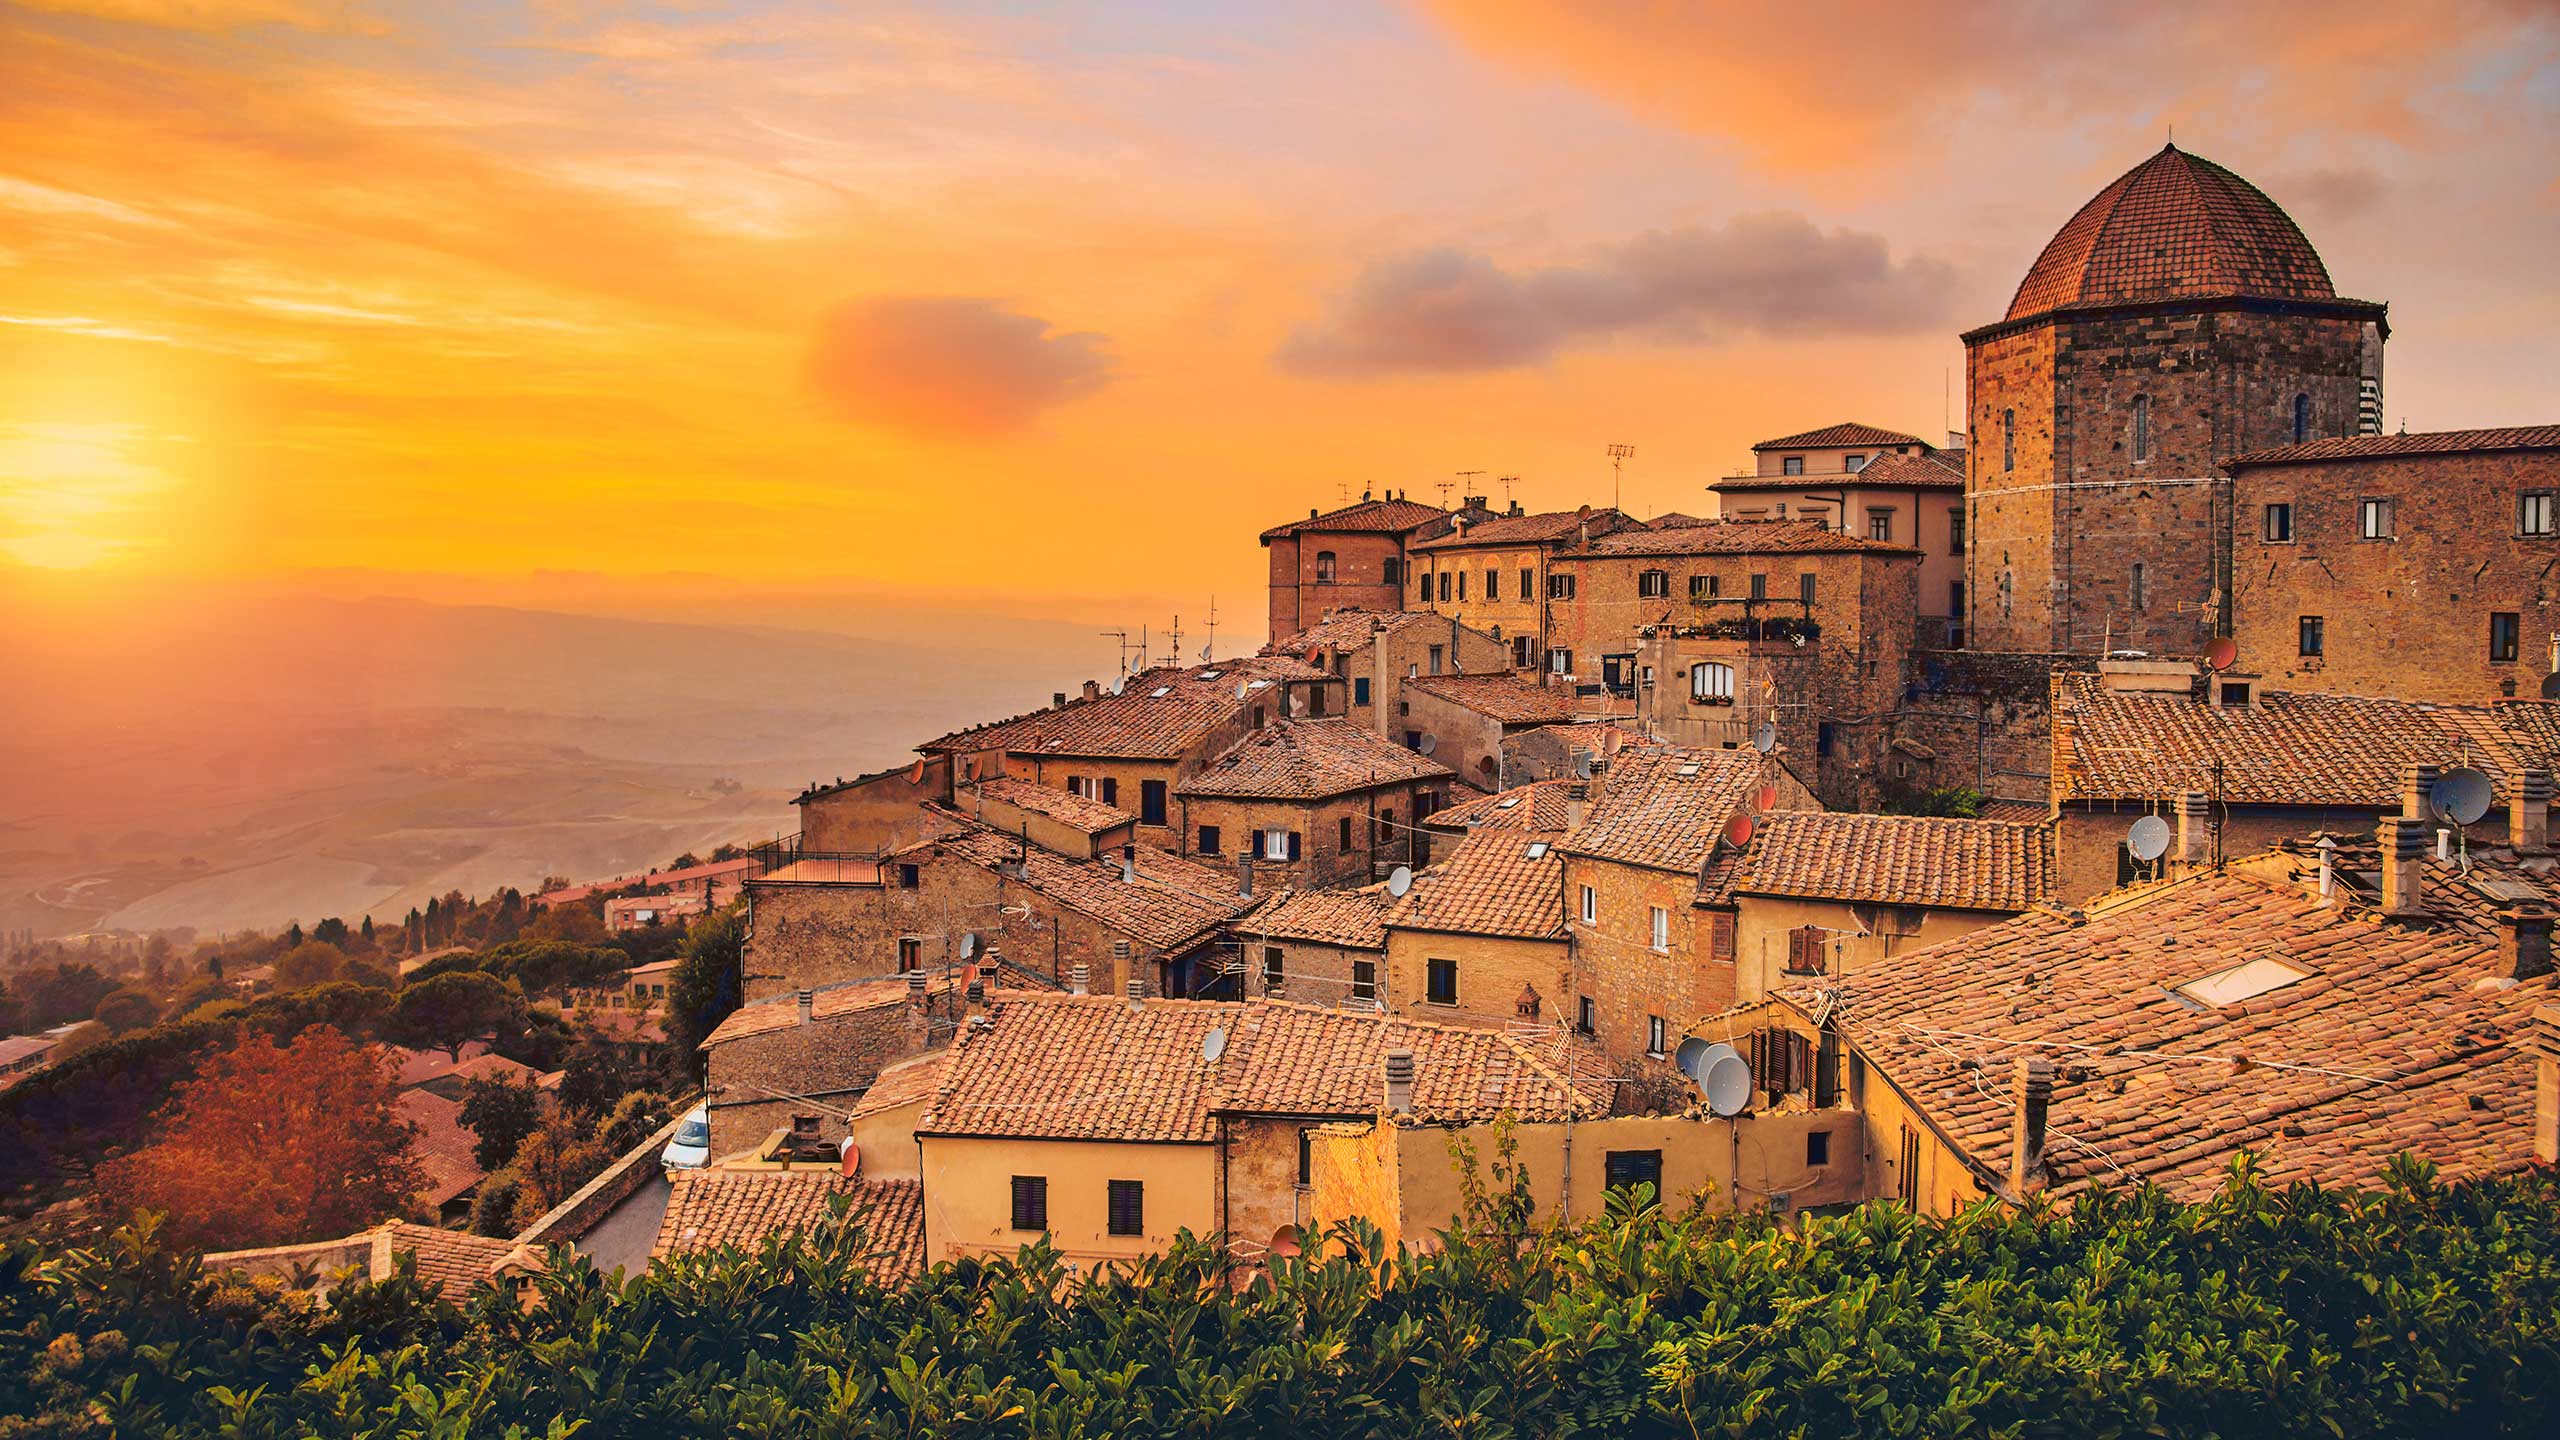 Volterra, walled town southwest of Florence, in Italy.